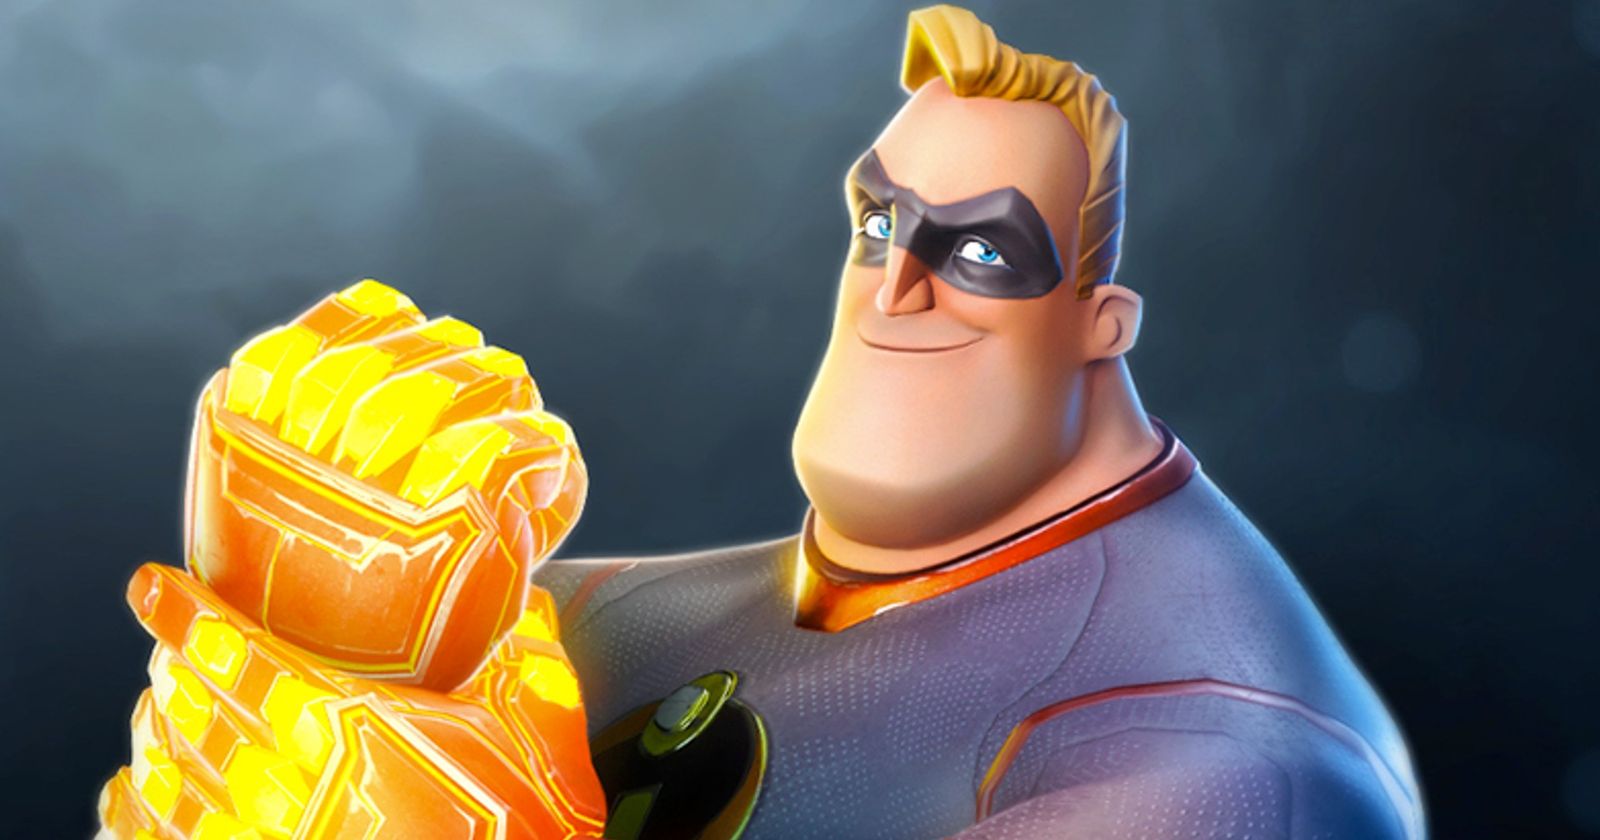 Roblox - Evildoers beware! 👊 #TheNextLevel takes on #Roblox's Heroes  Event, sponsored by Disney Pixar's #Incredibles2, today at 3PM PDT. Tune in  early at 2PM to catch Evanbear1: twitch.tv/Roblox